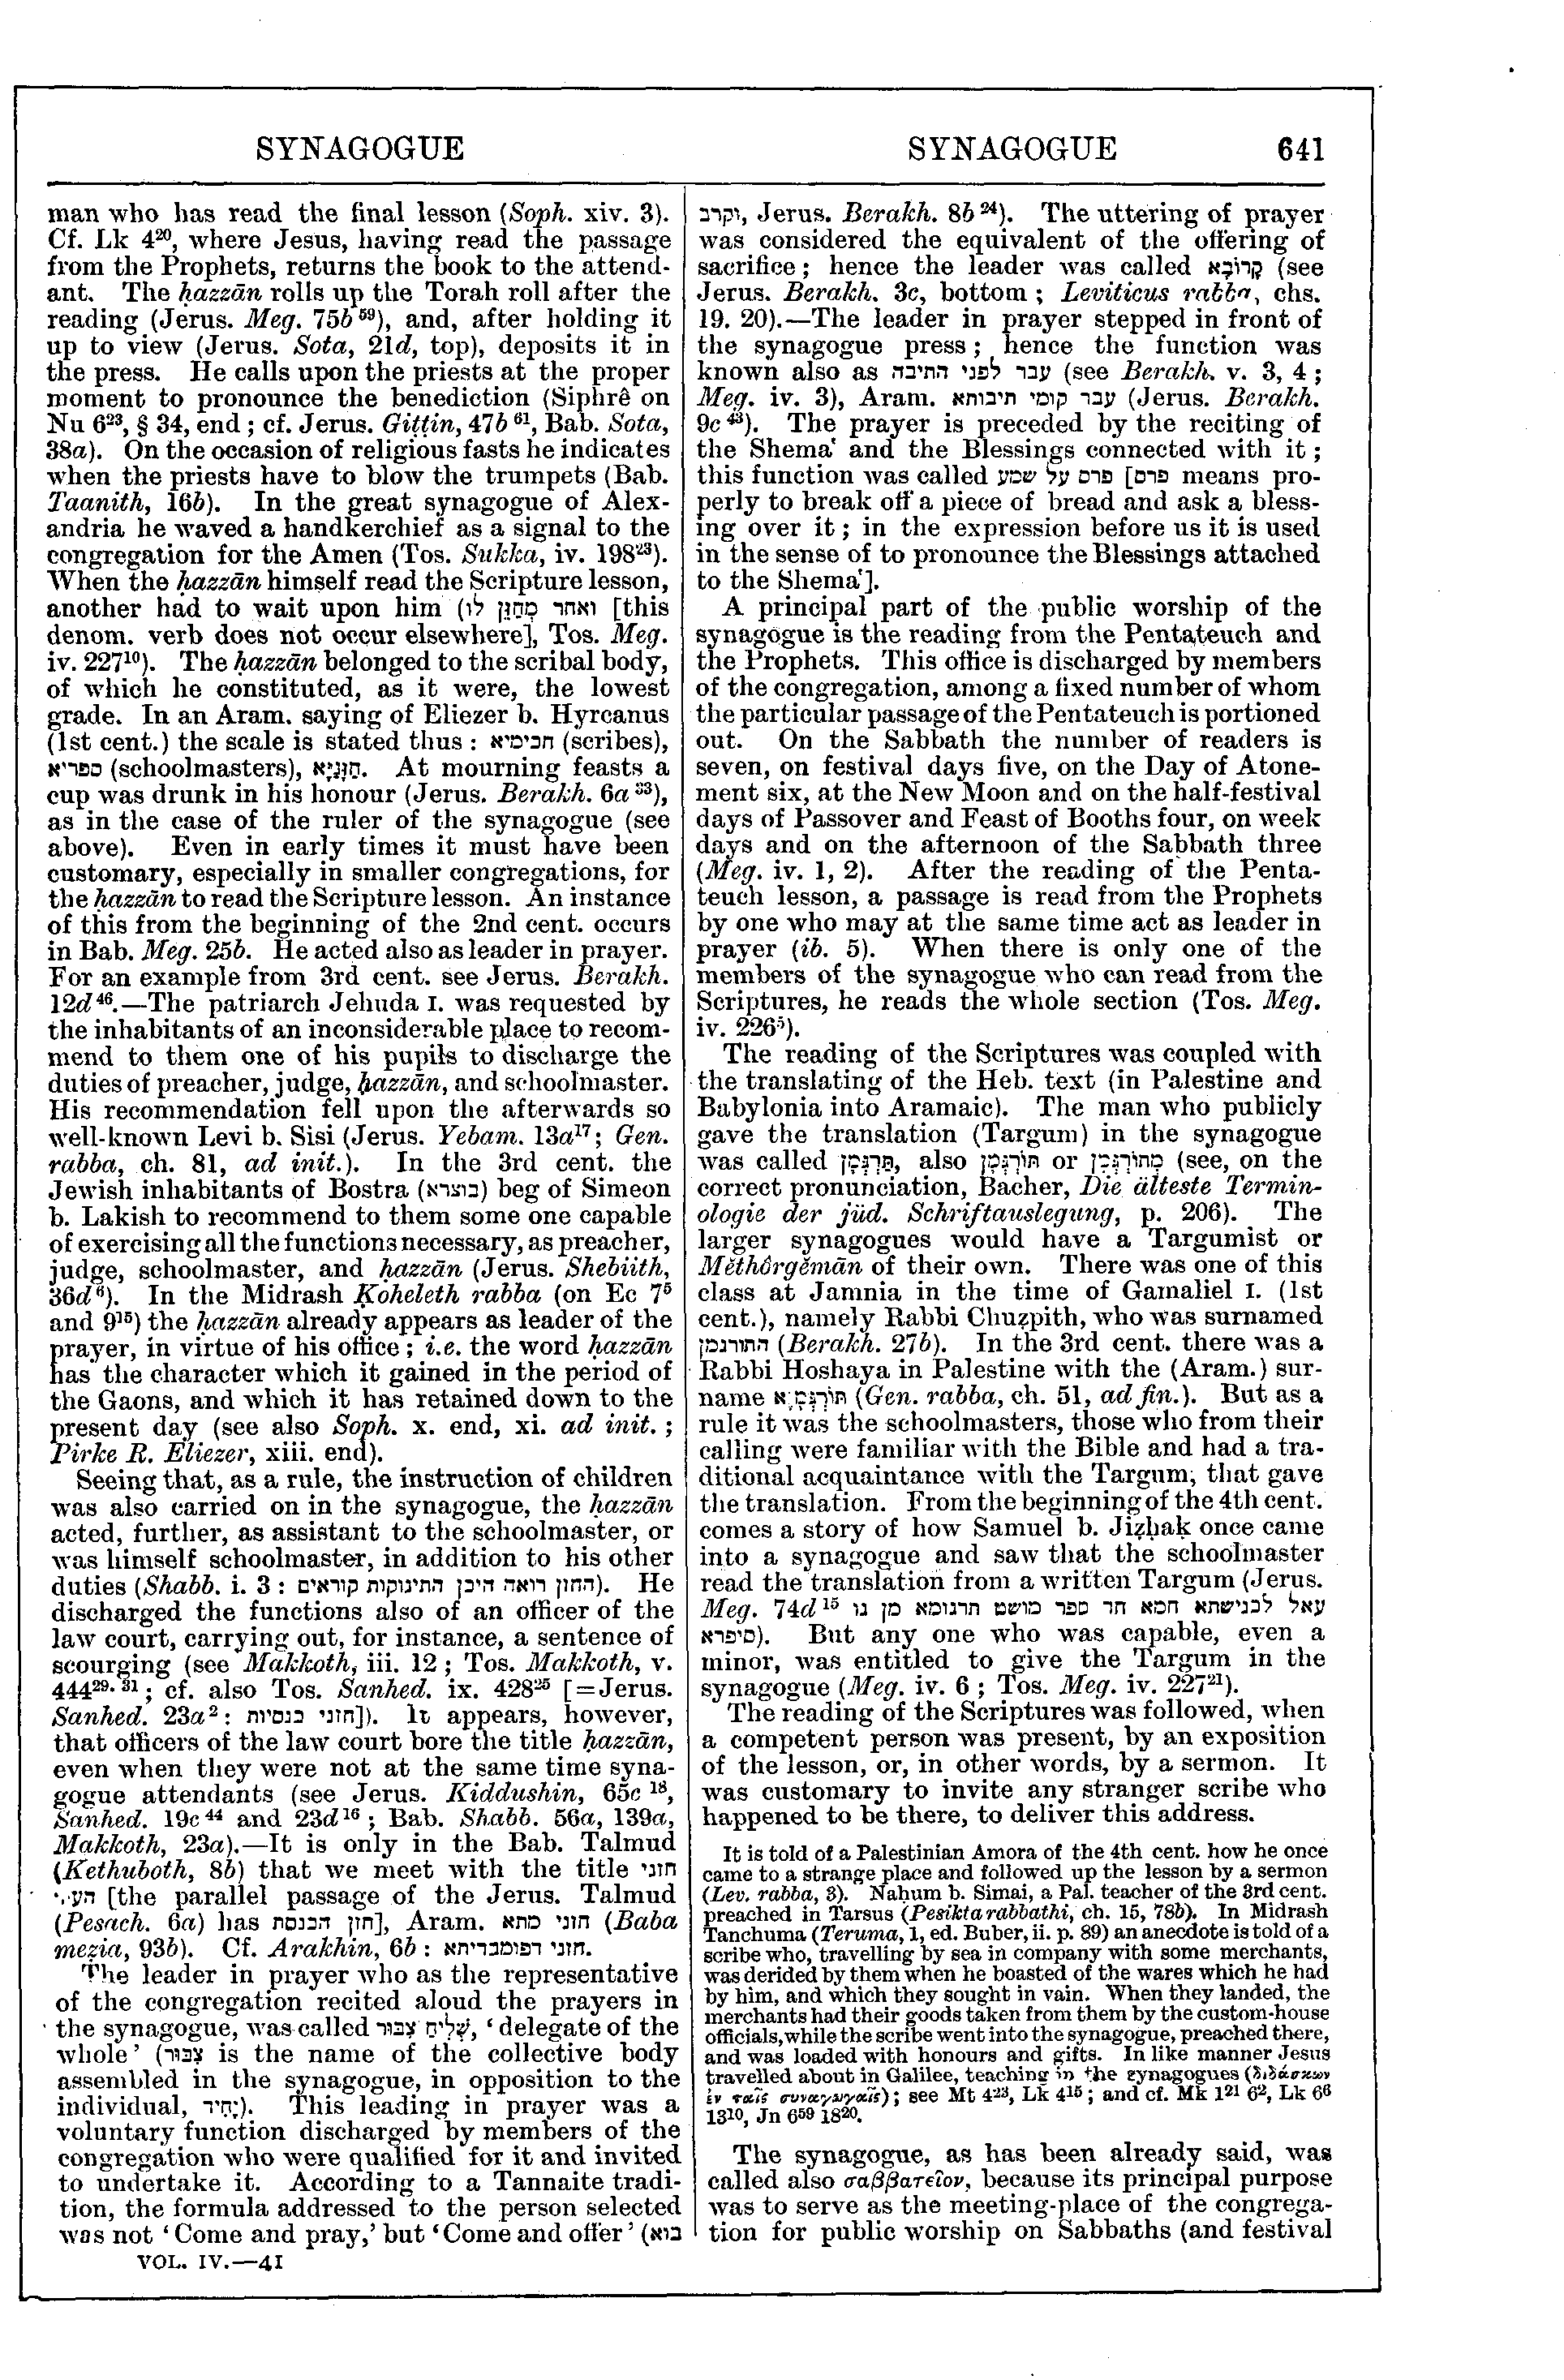 Image of page 641